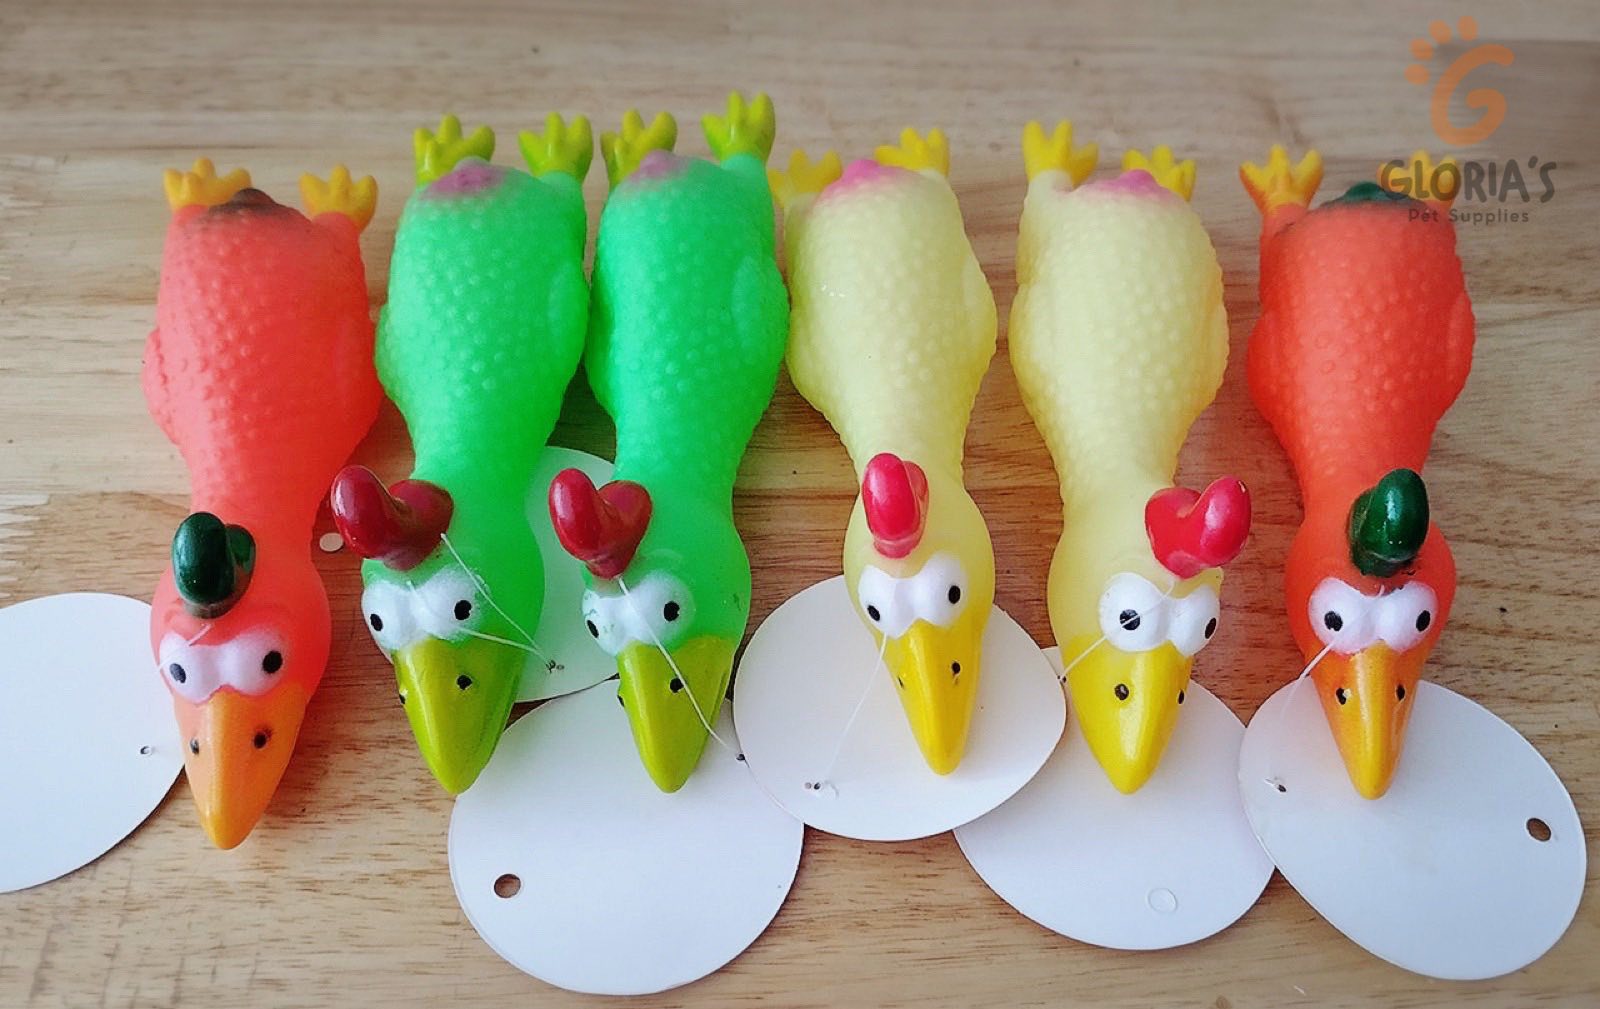 Colorful Chicken Toy with squeak